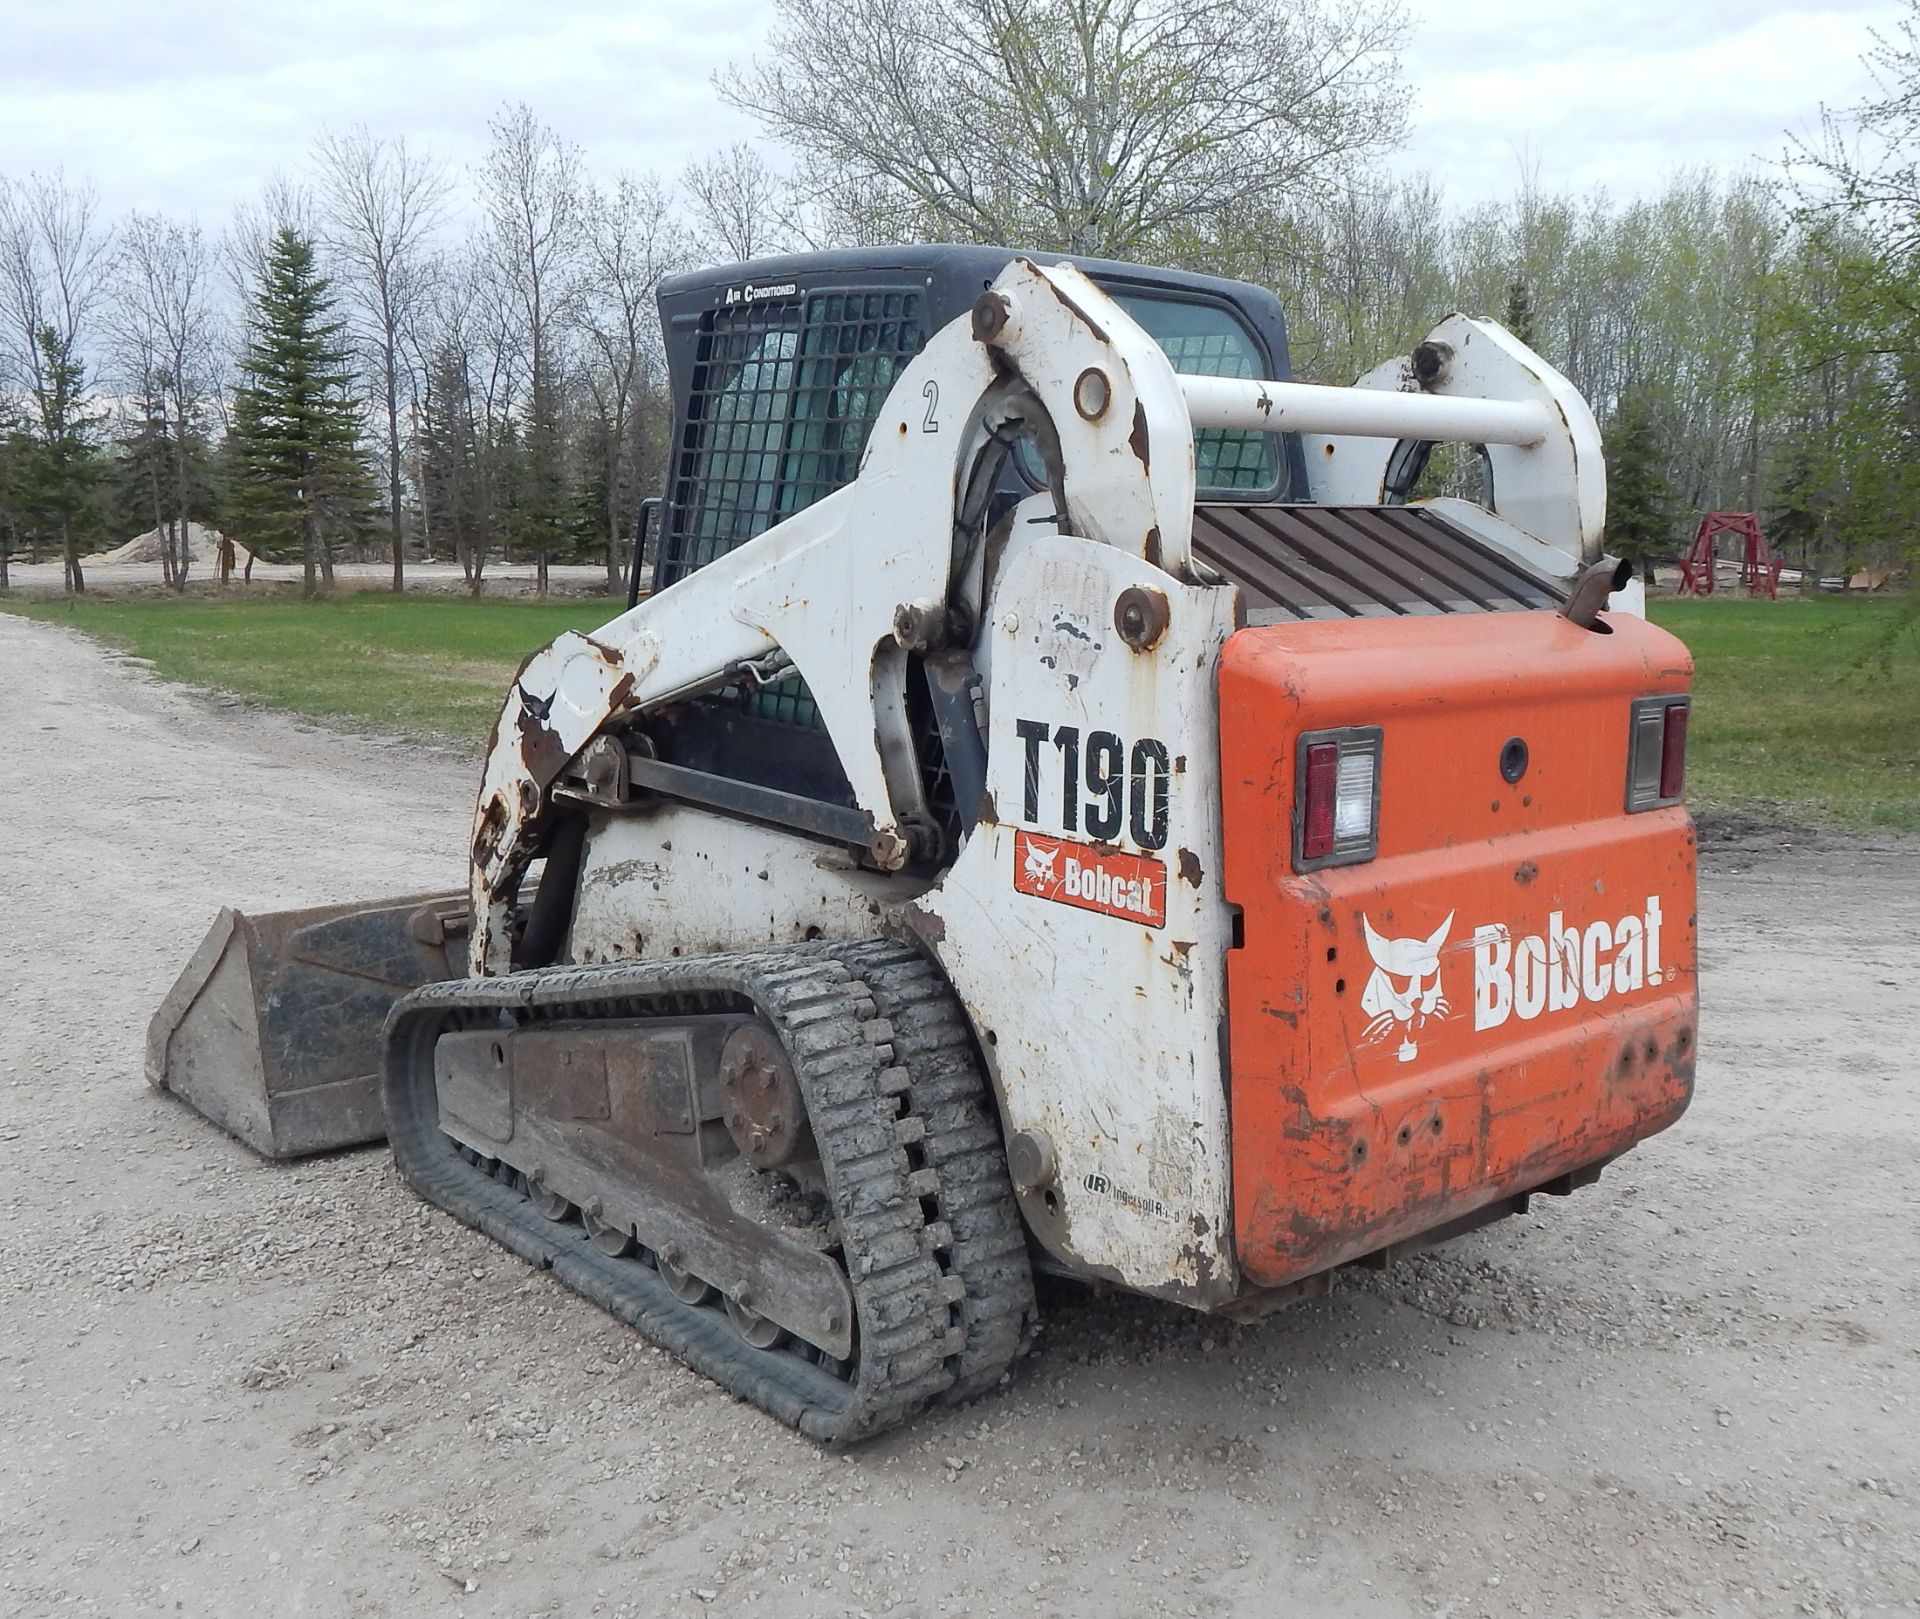 BOBCAT (2006) T190 SKID STEER WITH INLINE 4 TURBO DIESEL ENGINE, 6' SMOOTH BUCKET, RUBBER TRACKS, - Image 5 of 6